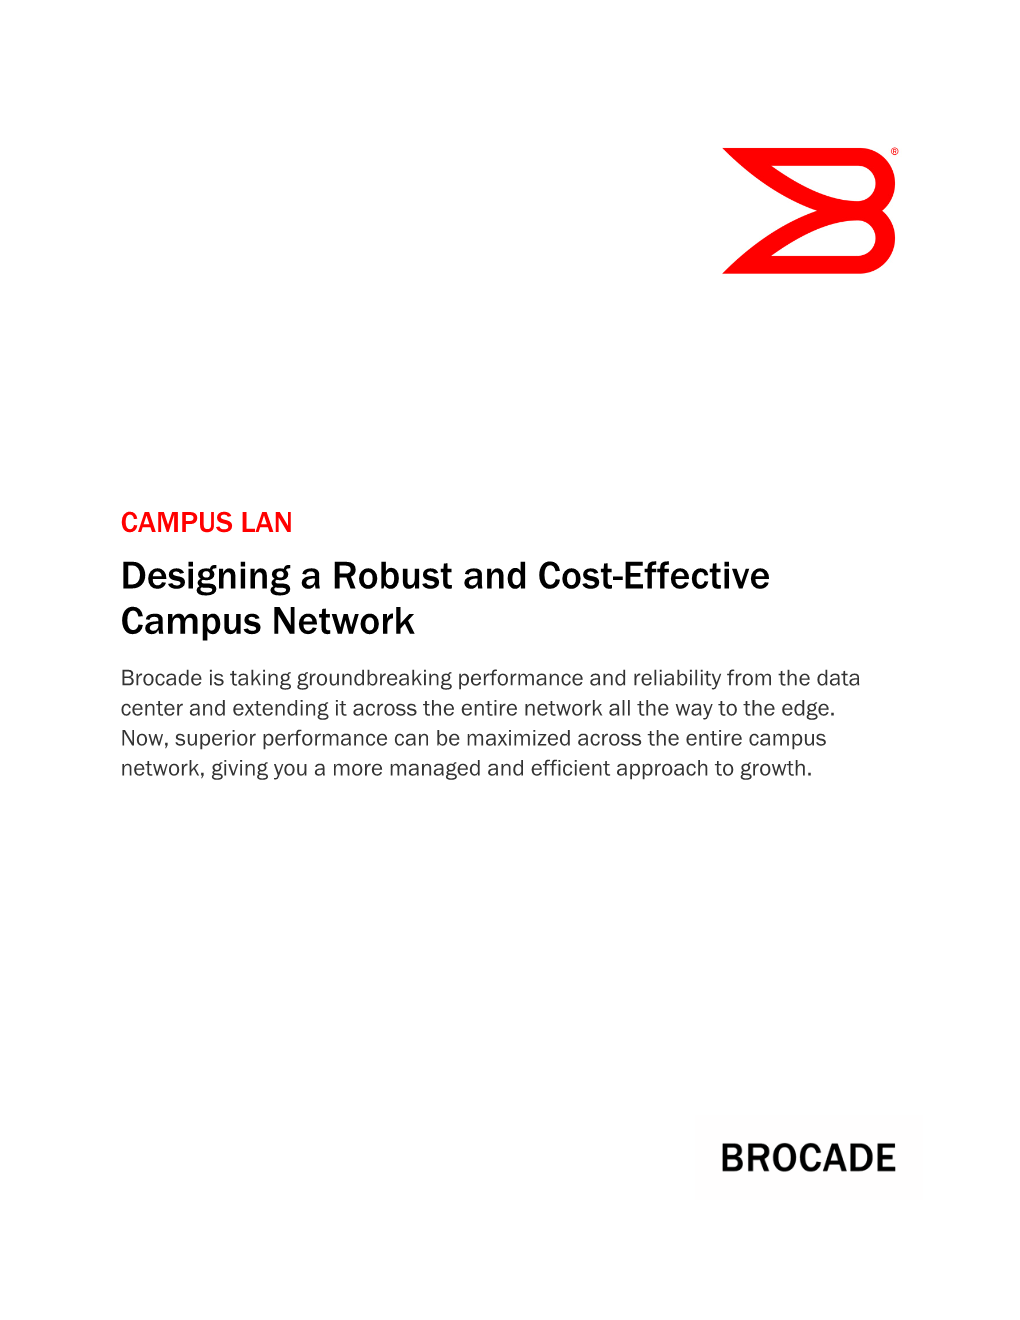 Designing a Robust and Cost-Effective Campus Network